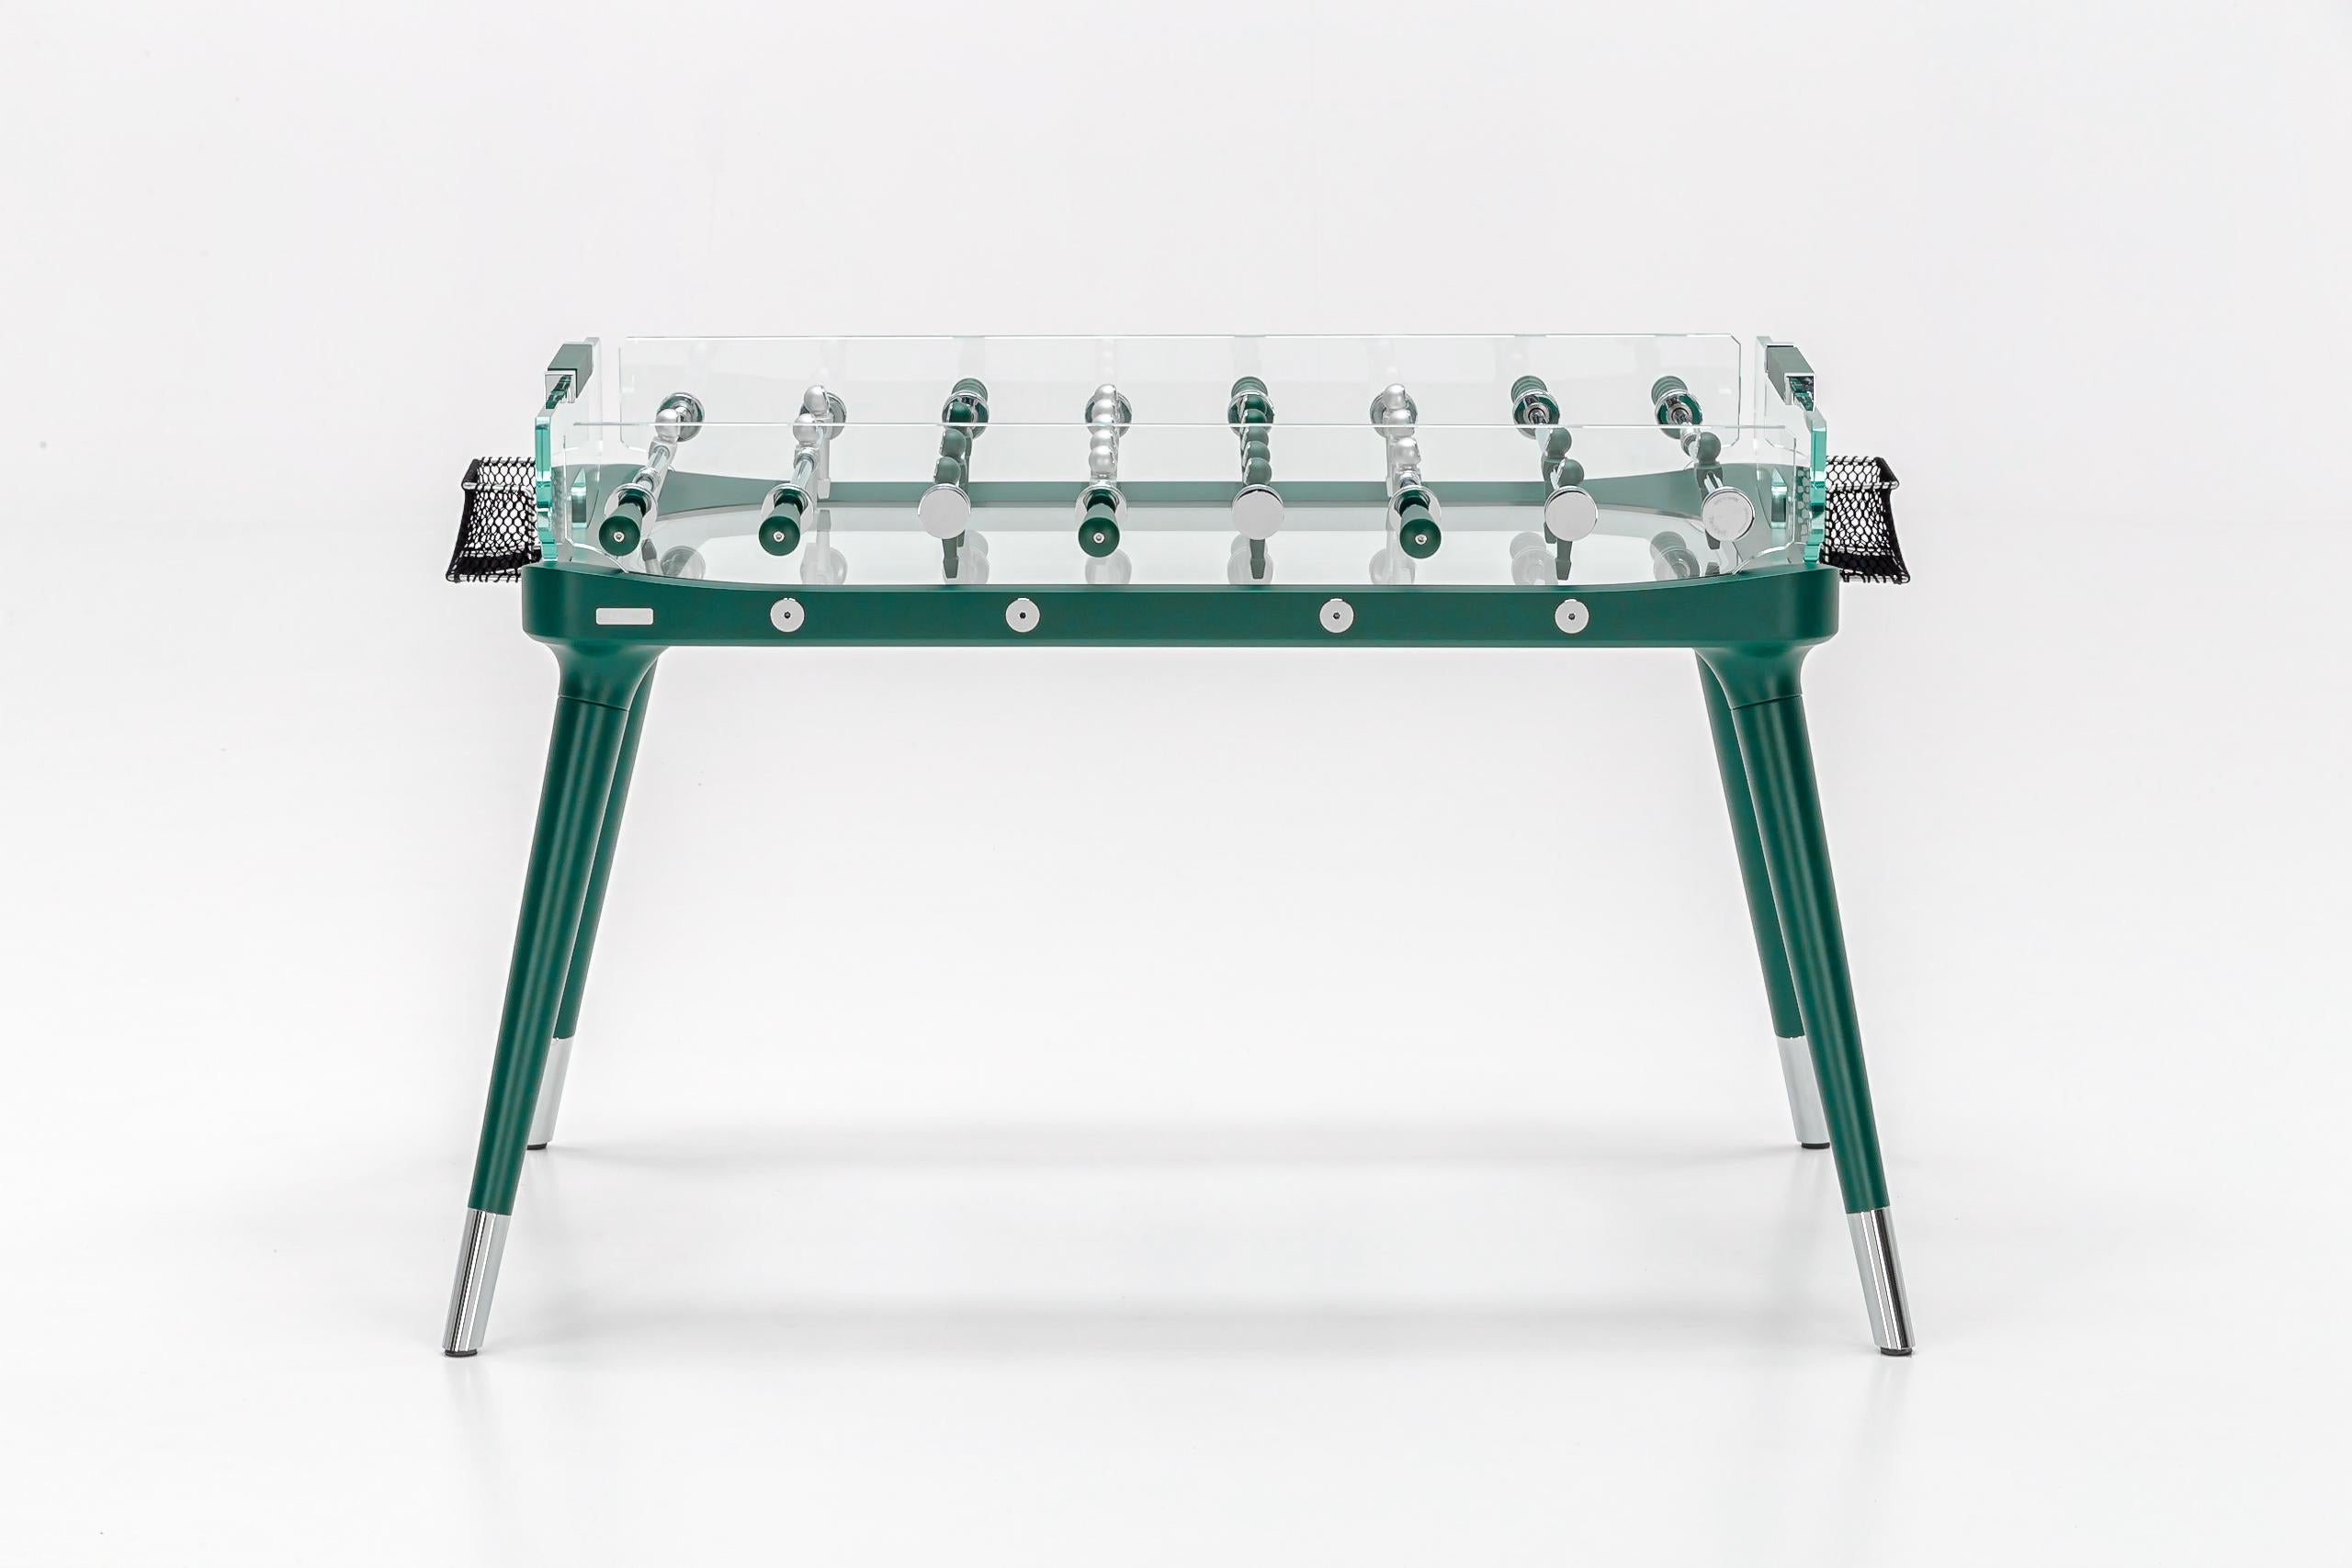 Italian 90° Minuto Foosball Table by Teckell in Matte Forest Green